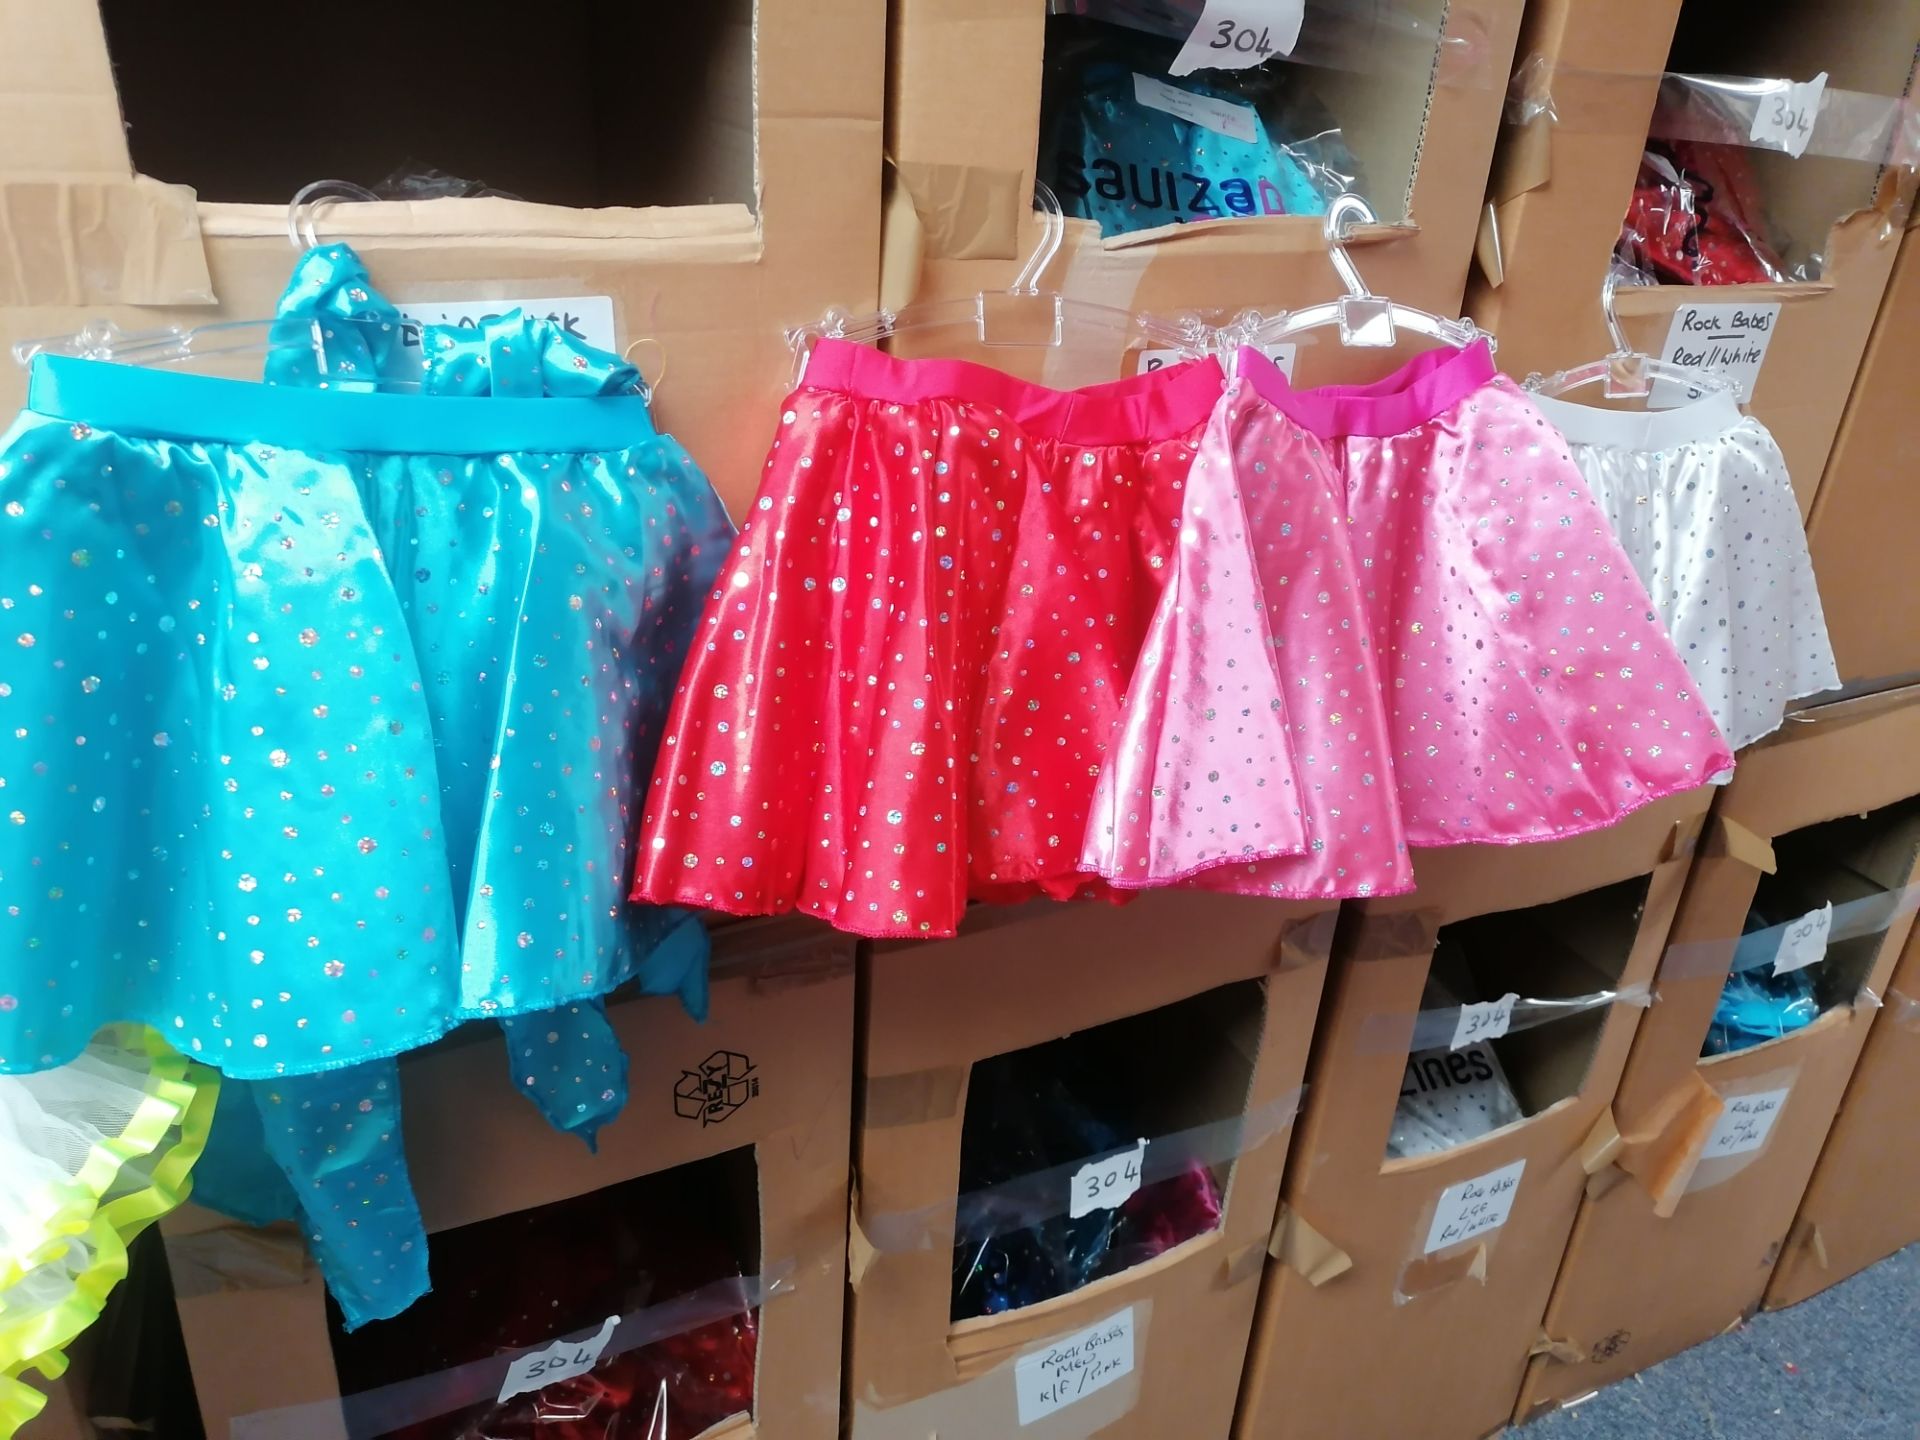 150+ Estimated skirts and sash in sizes-small-medium-large 6x boxes